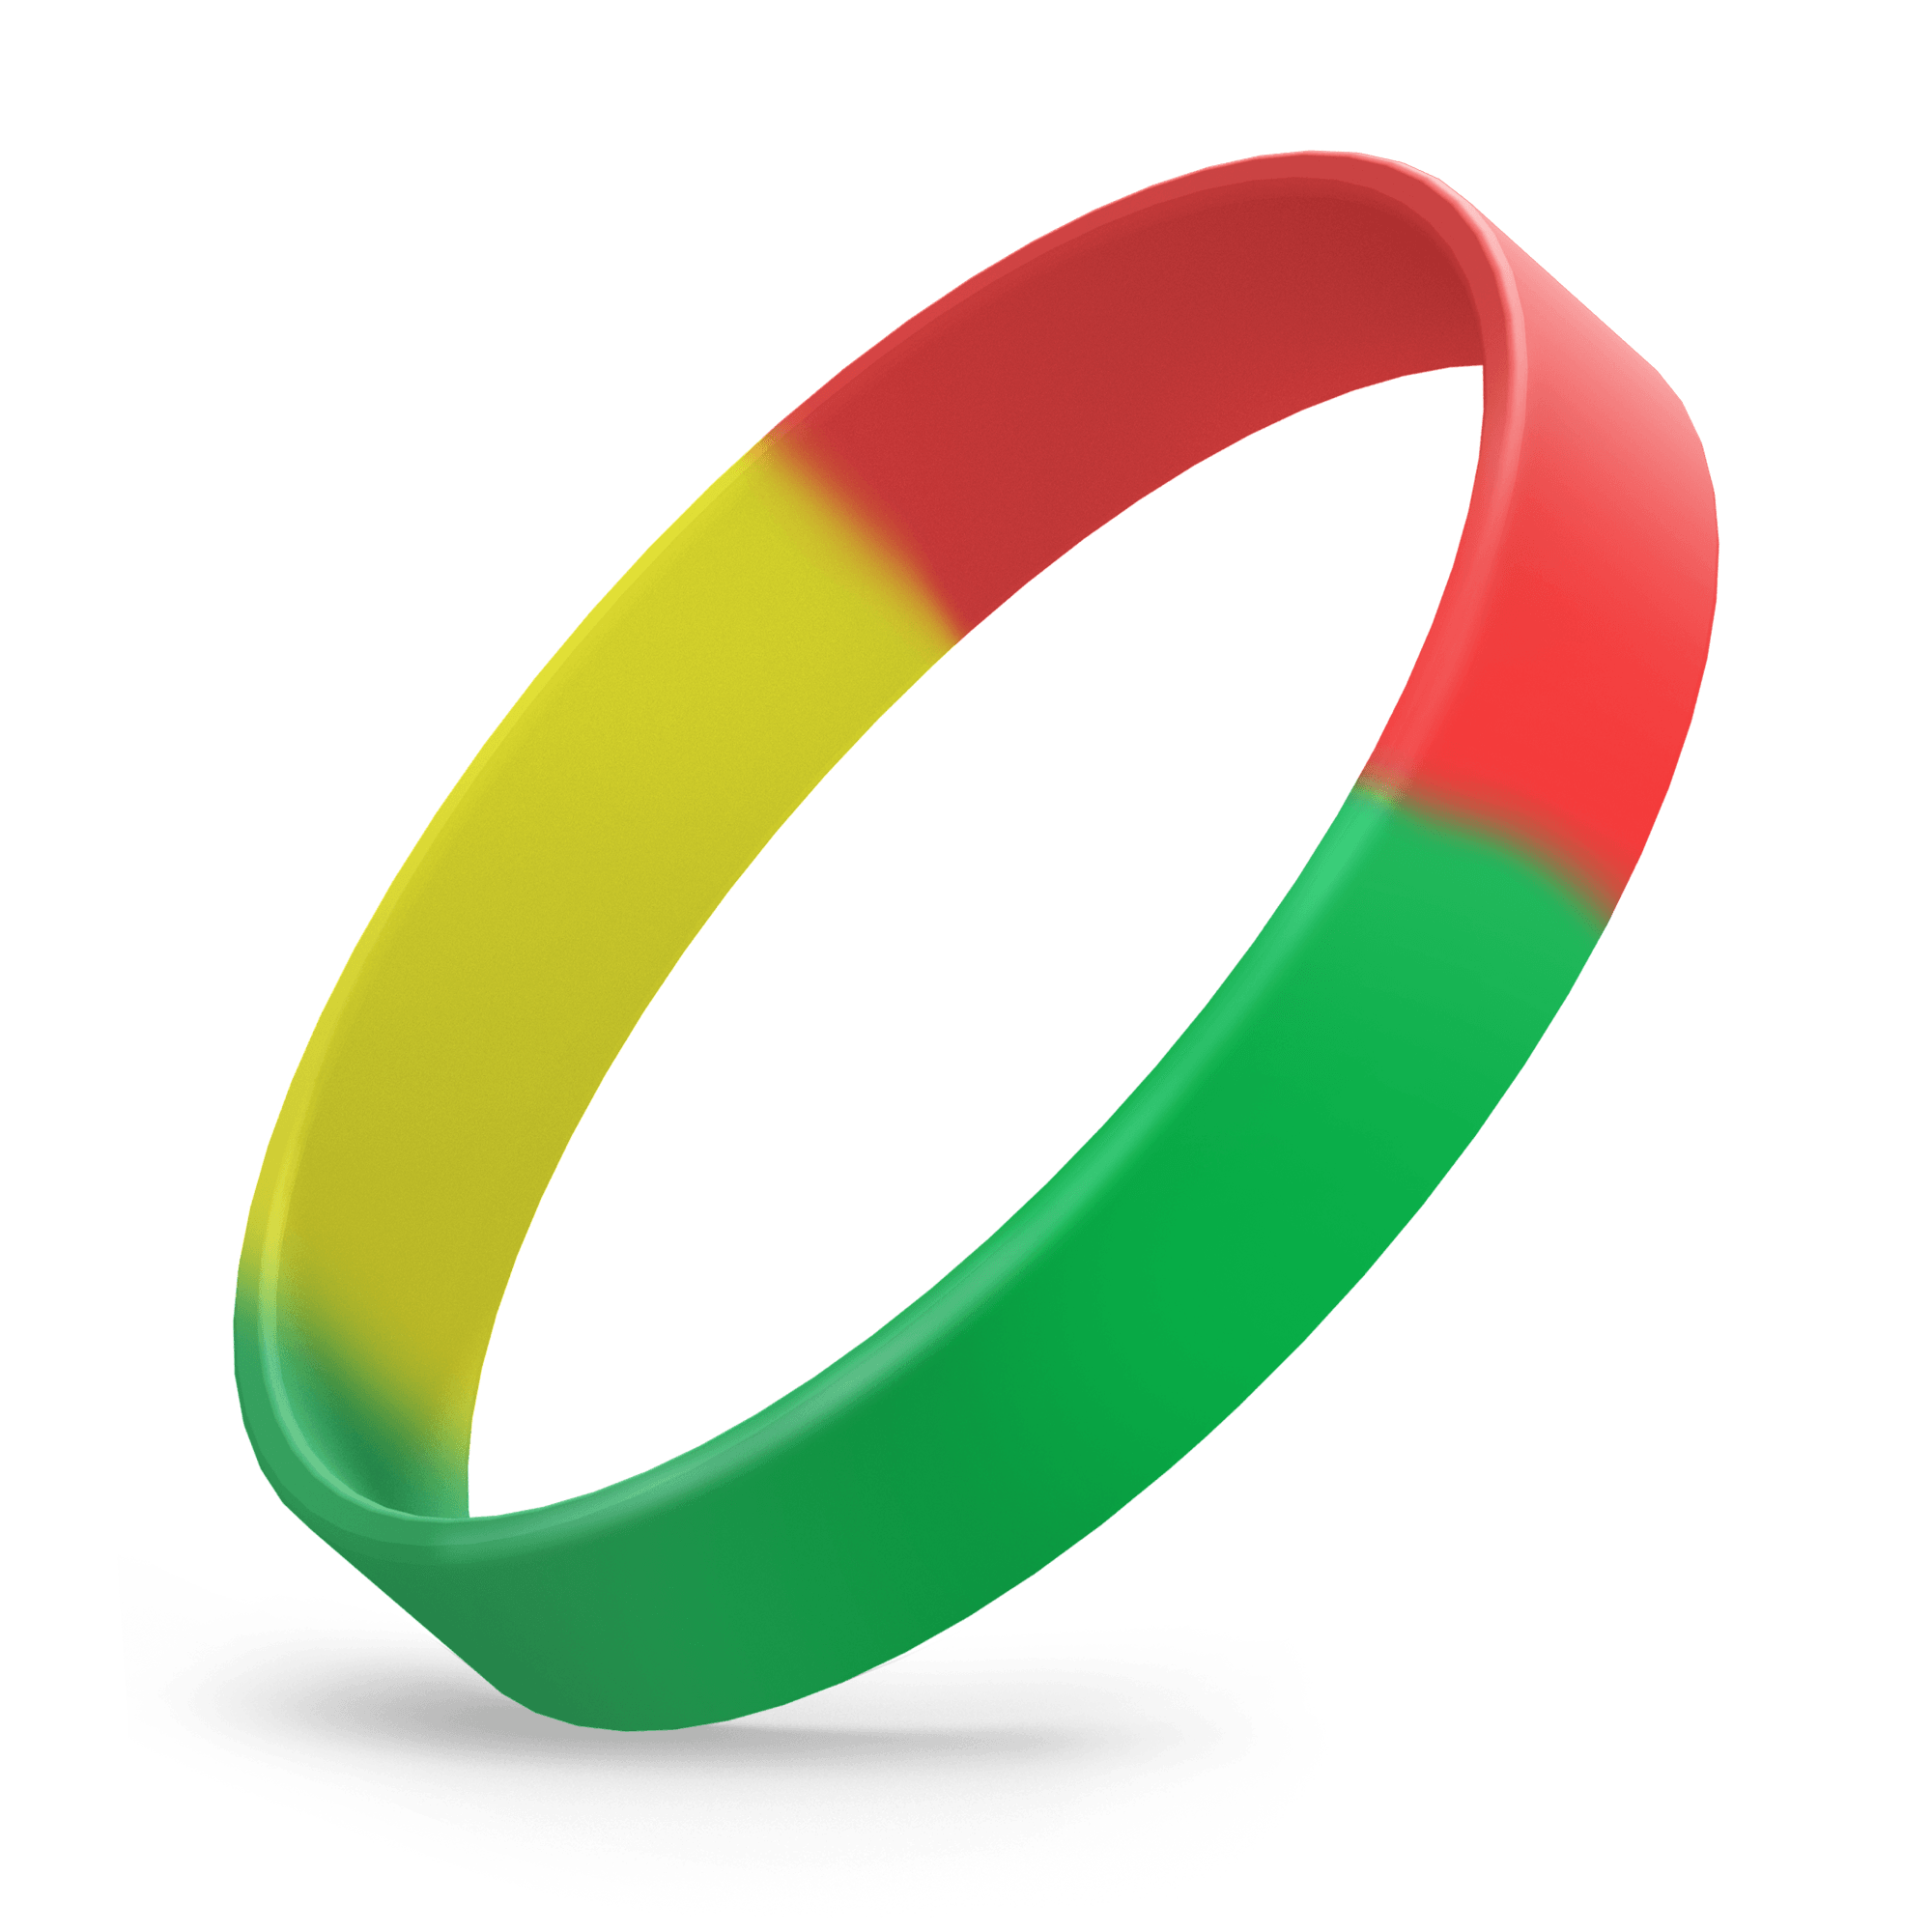 Custom Ink Injected (Green / Red / Yellow Segmented) Silicone Wristbands - Rubber Bracelets by Wristband Resources